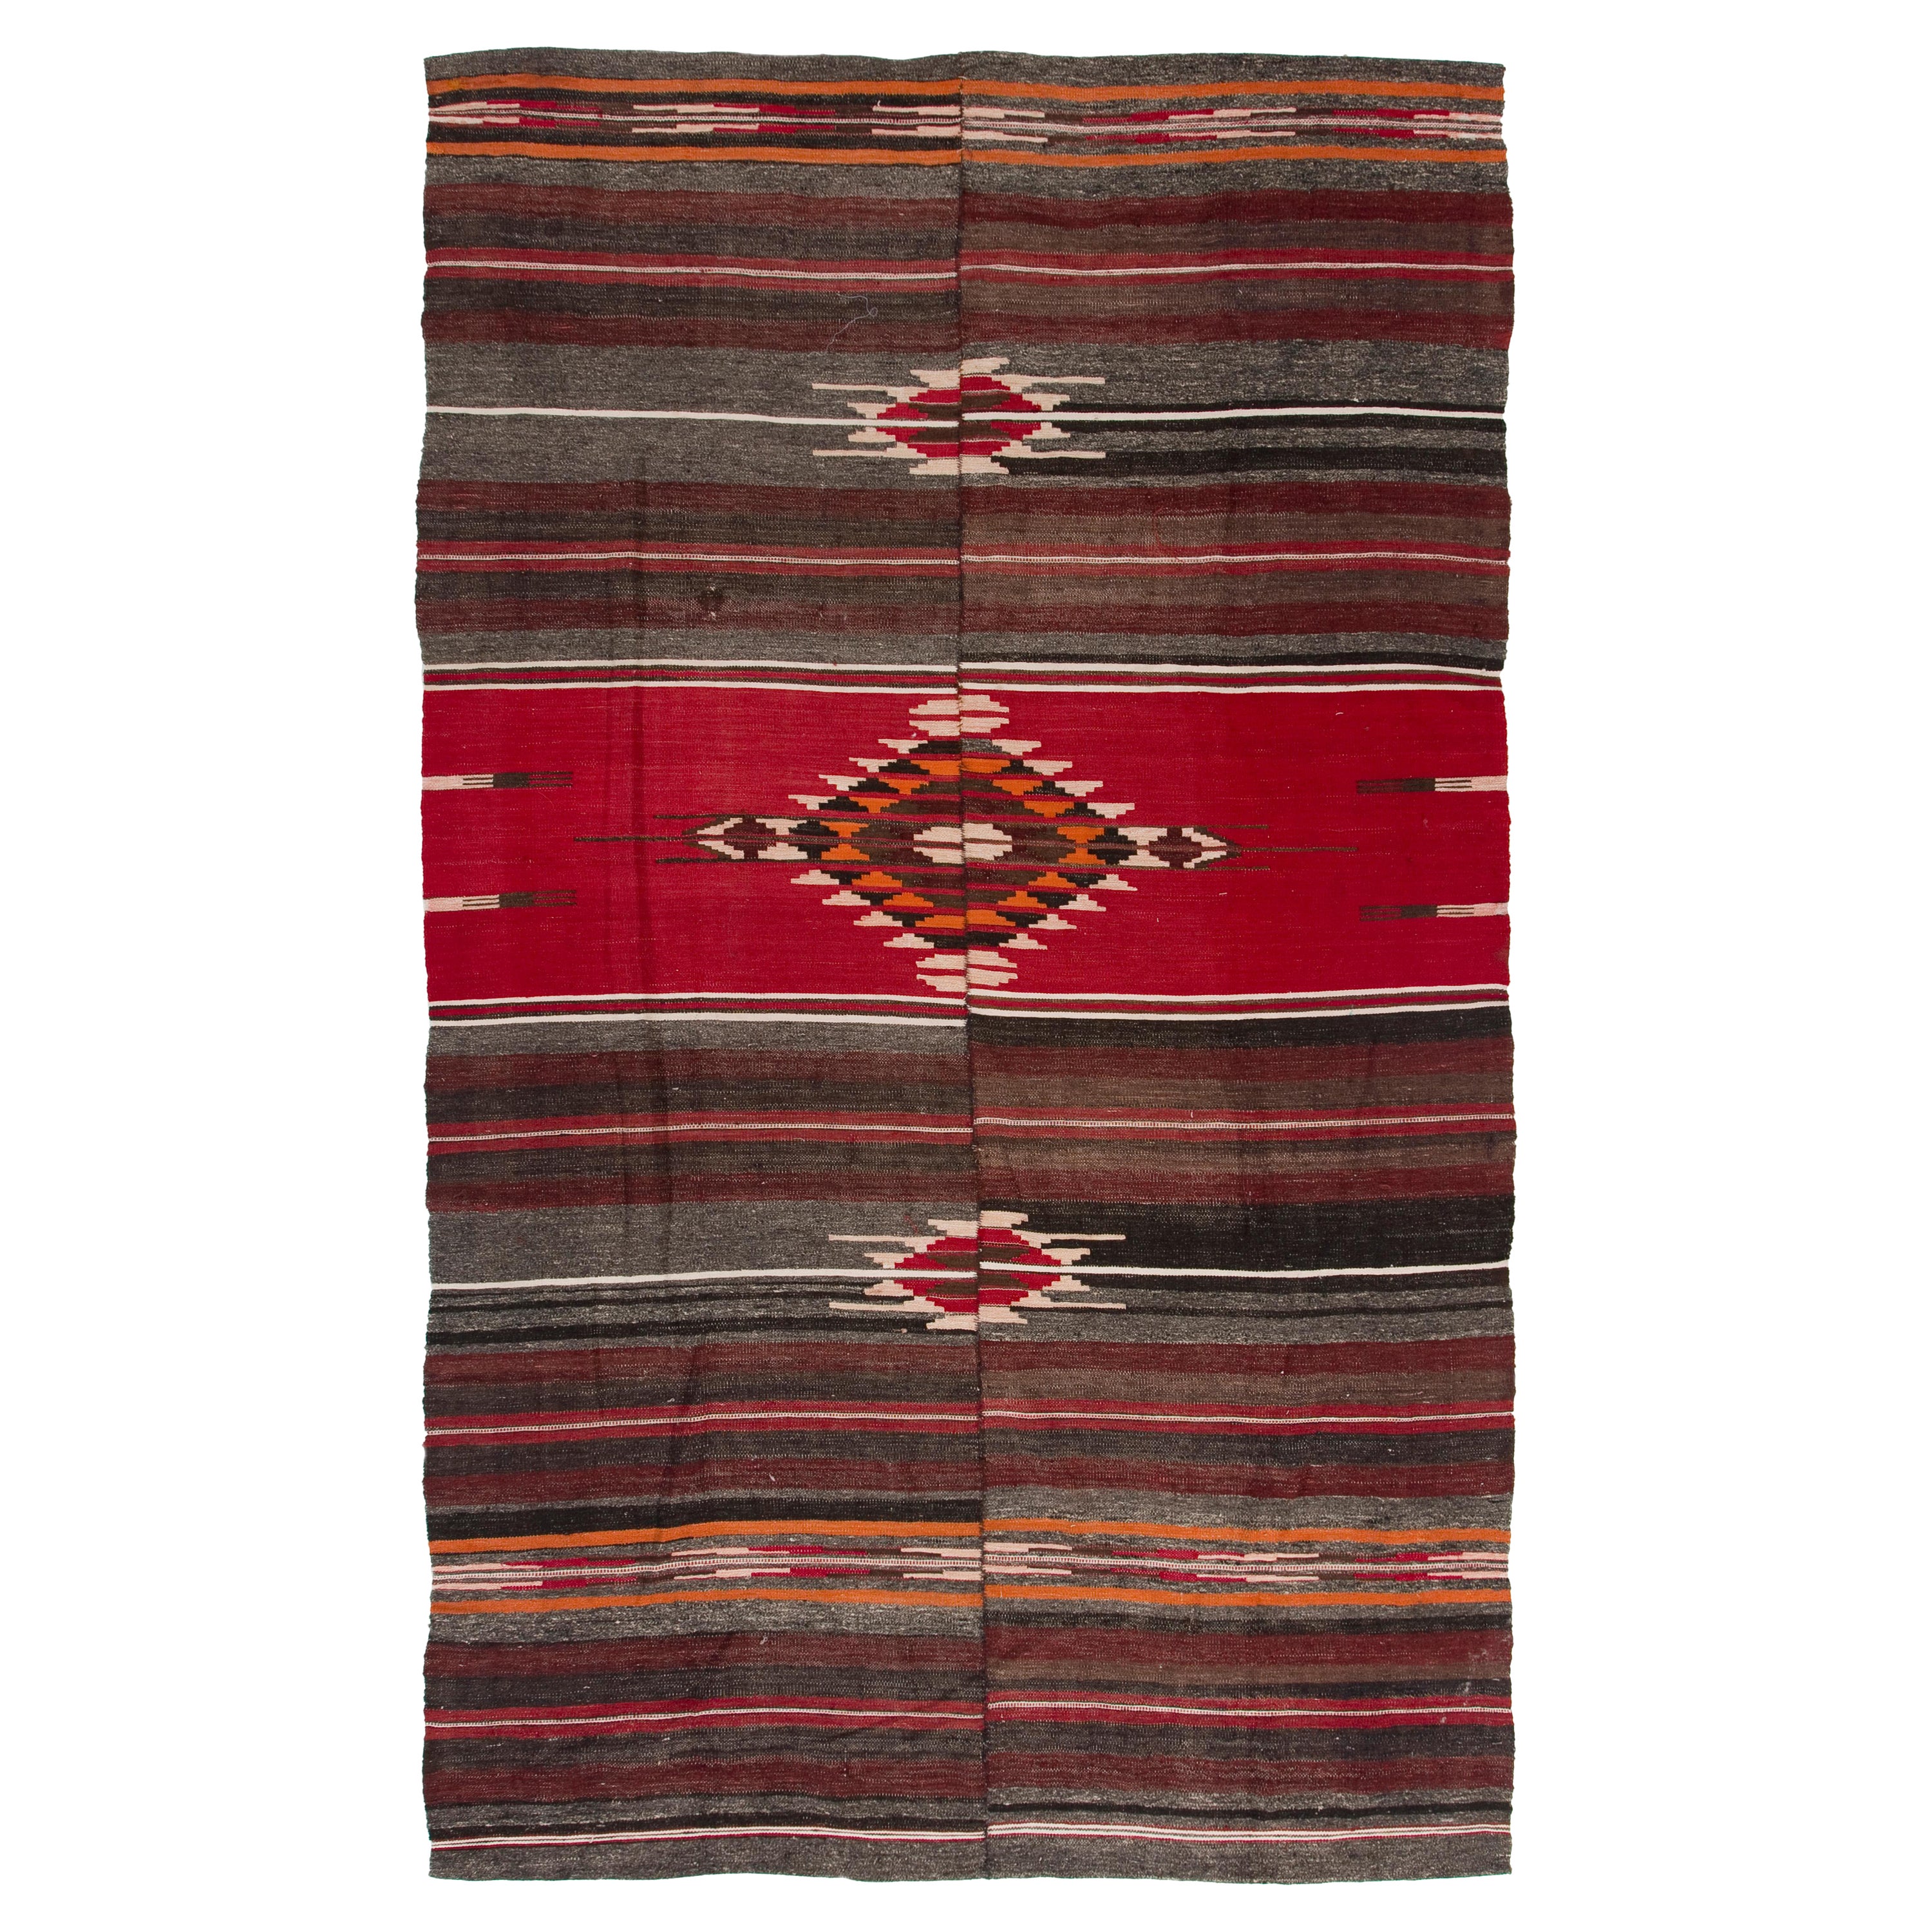 5x8 ft Vintage Handmade Turkish Kilim with Southwest Style, (FlatWeave) All Wool For Sale